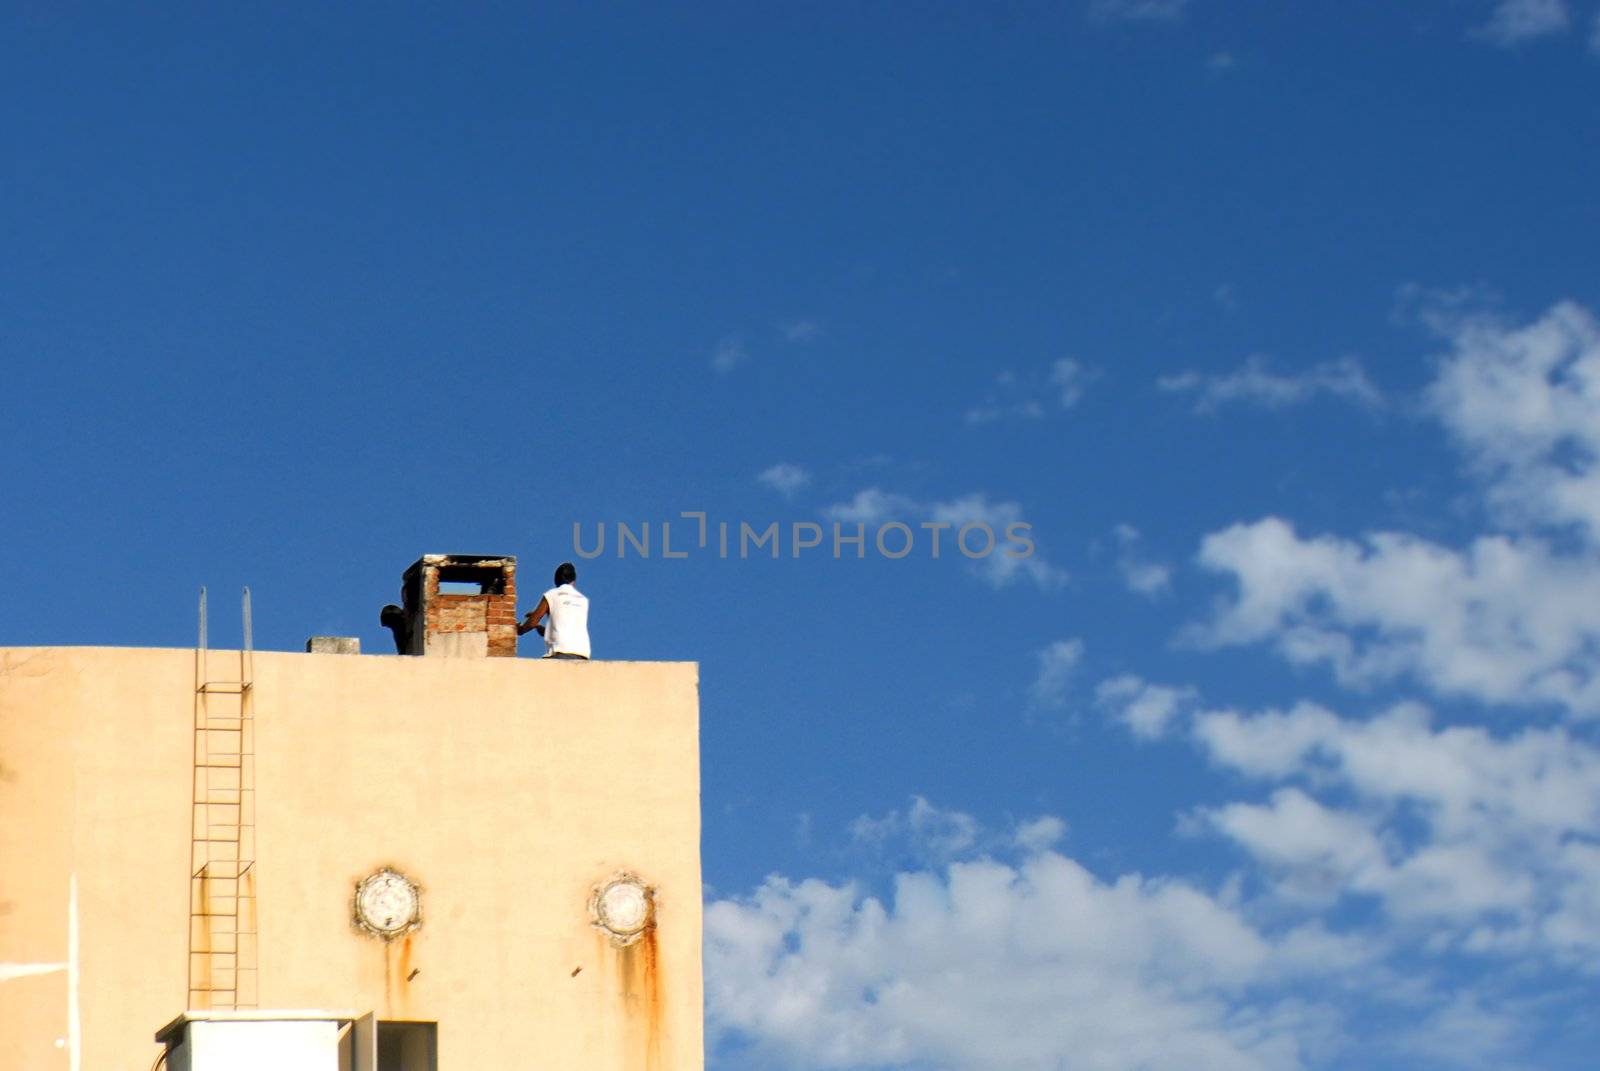 Man on a water tank over a blue sky background